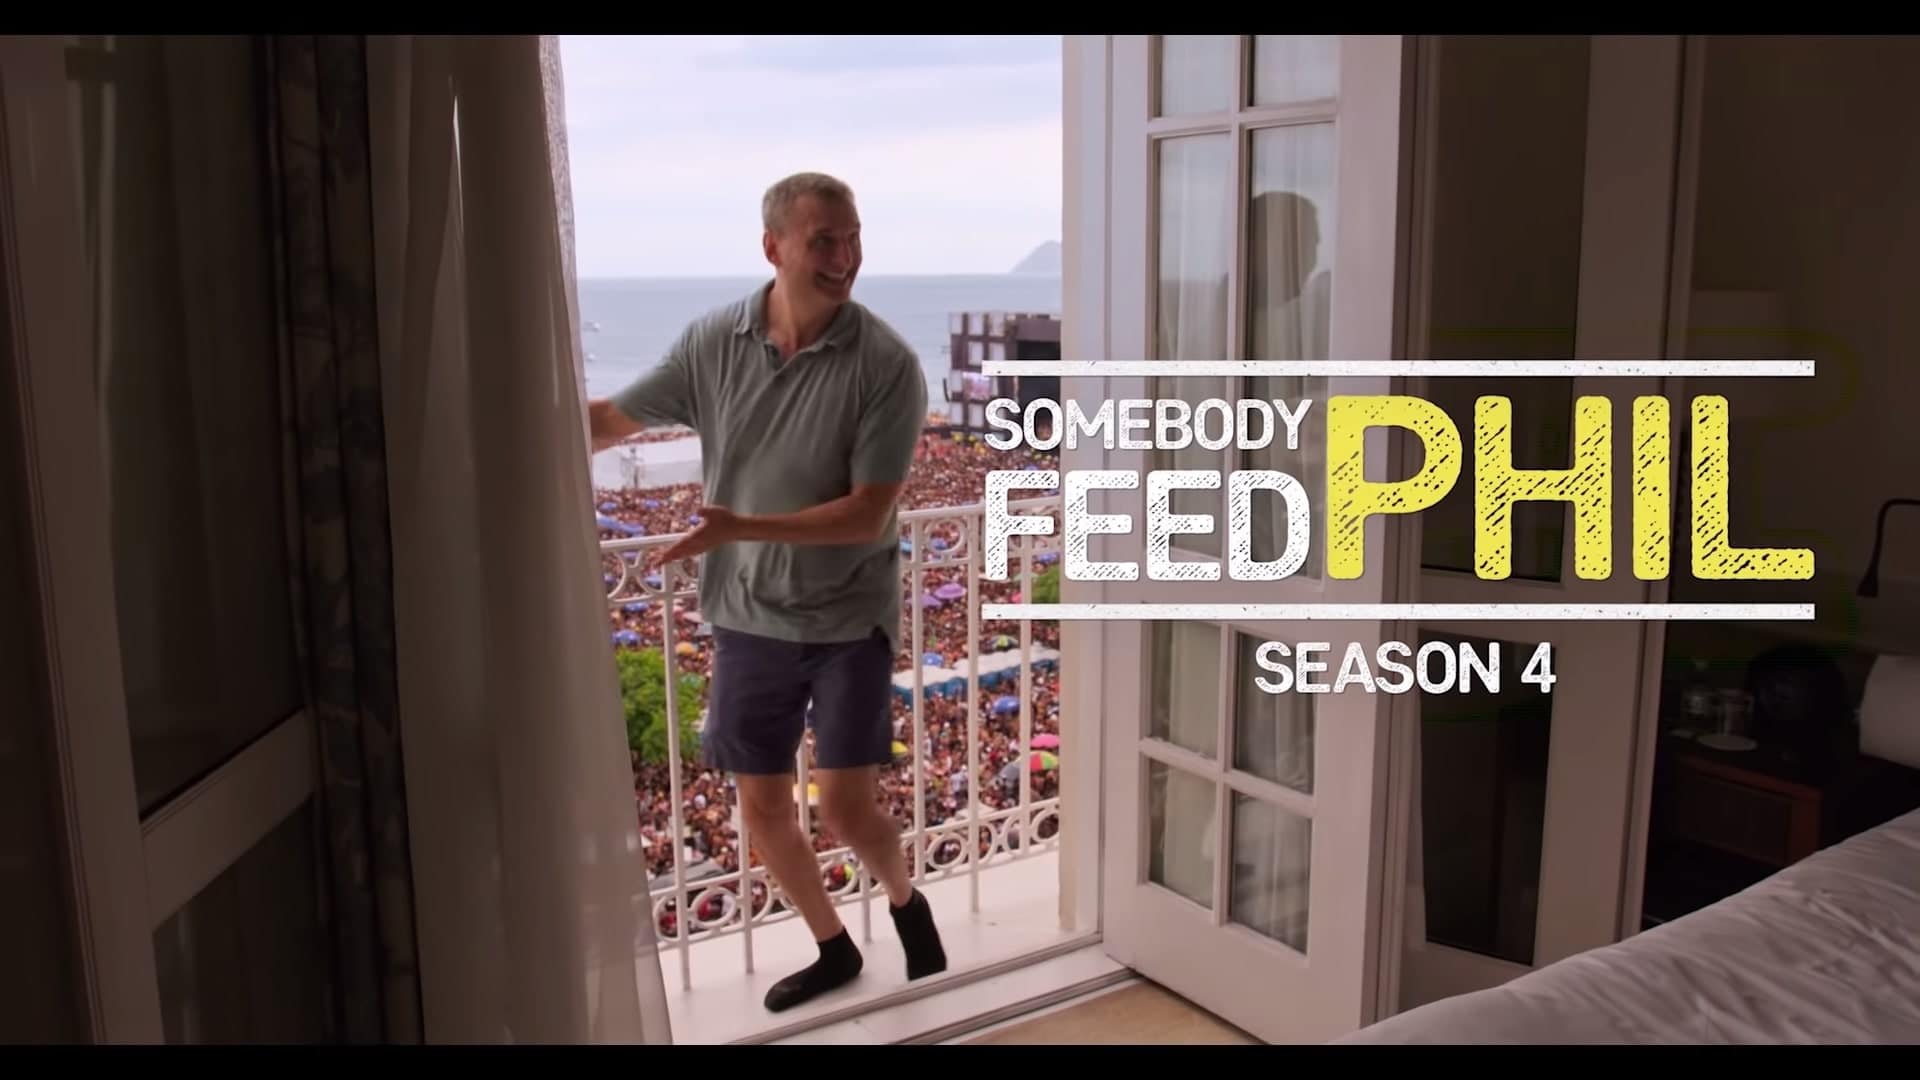 Netflix Somebody Feed Phil Season 4 Trailer, Netflix Comedy Shows, Netflix Reality Shows, Coming to Netflix in October 2020